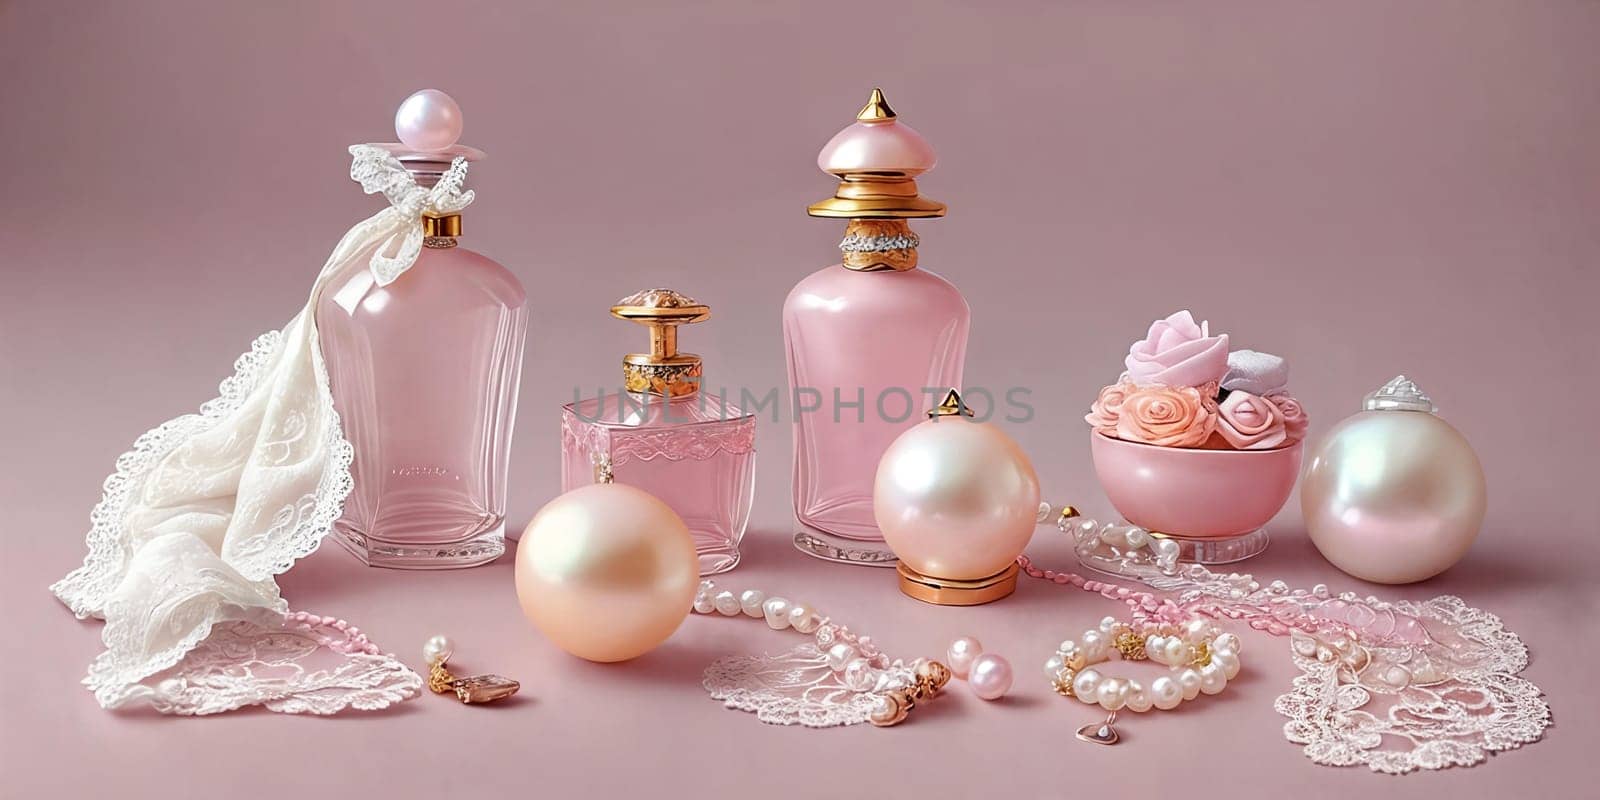 Pastel Palette. A still life scene featuring pastel-colored feminine accessories like a delicate pearl necklace by GoodOlga